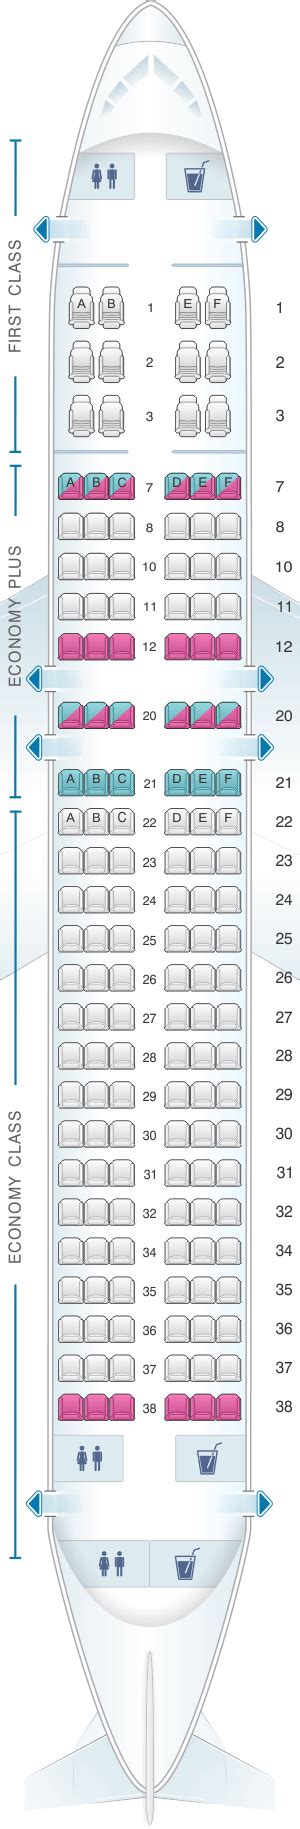 Airbus A320 Seating Plan United Airlines Awesome Home